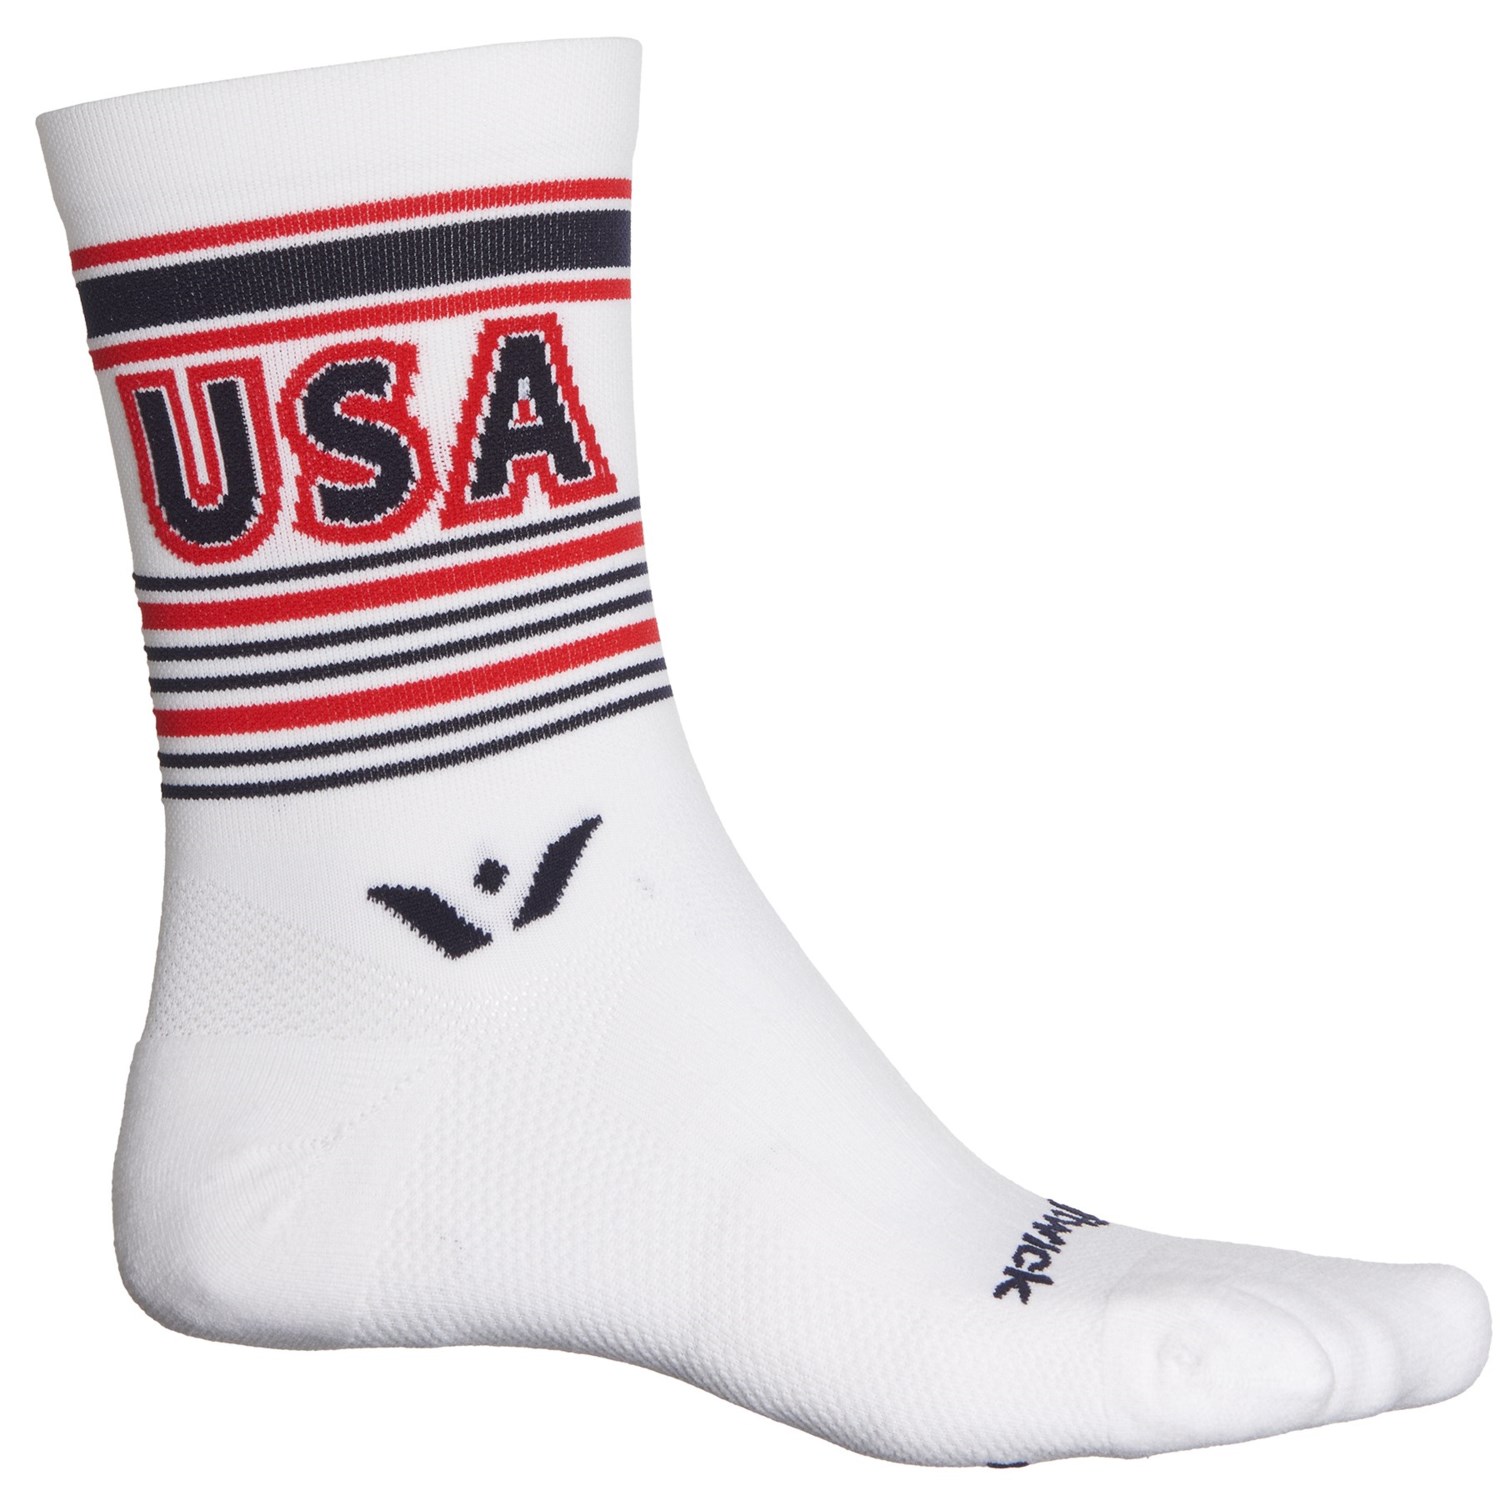 Swiftwick VISION Five Tribute Cycling Socks - Crew (For Men and Women)